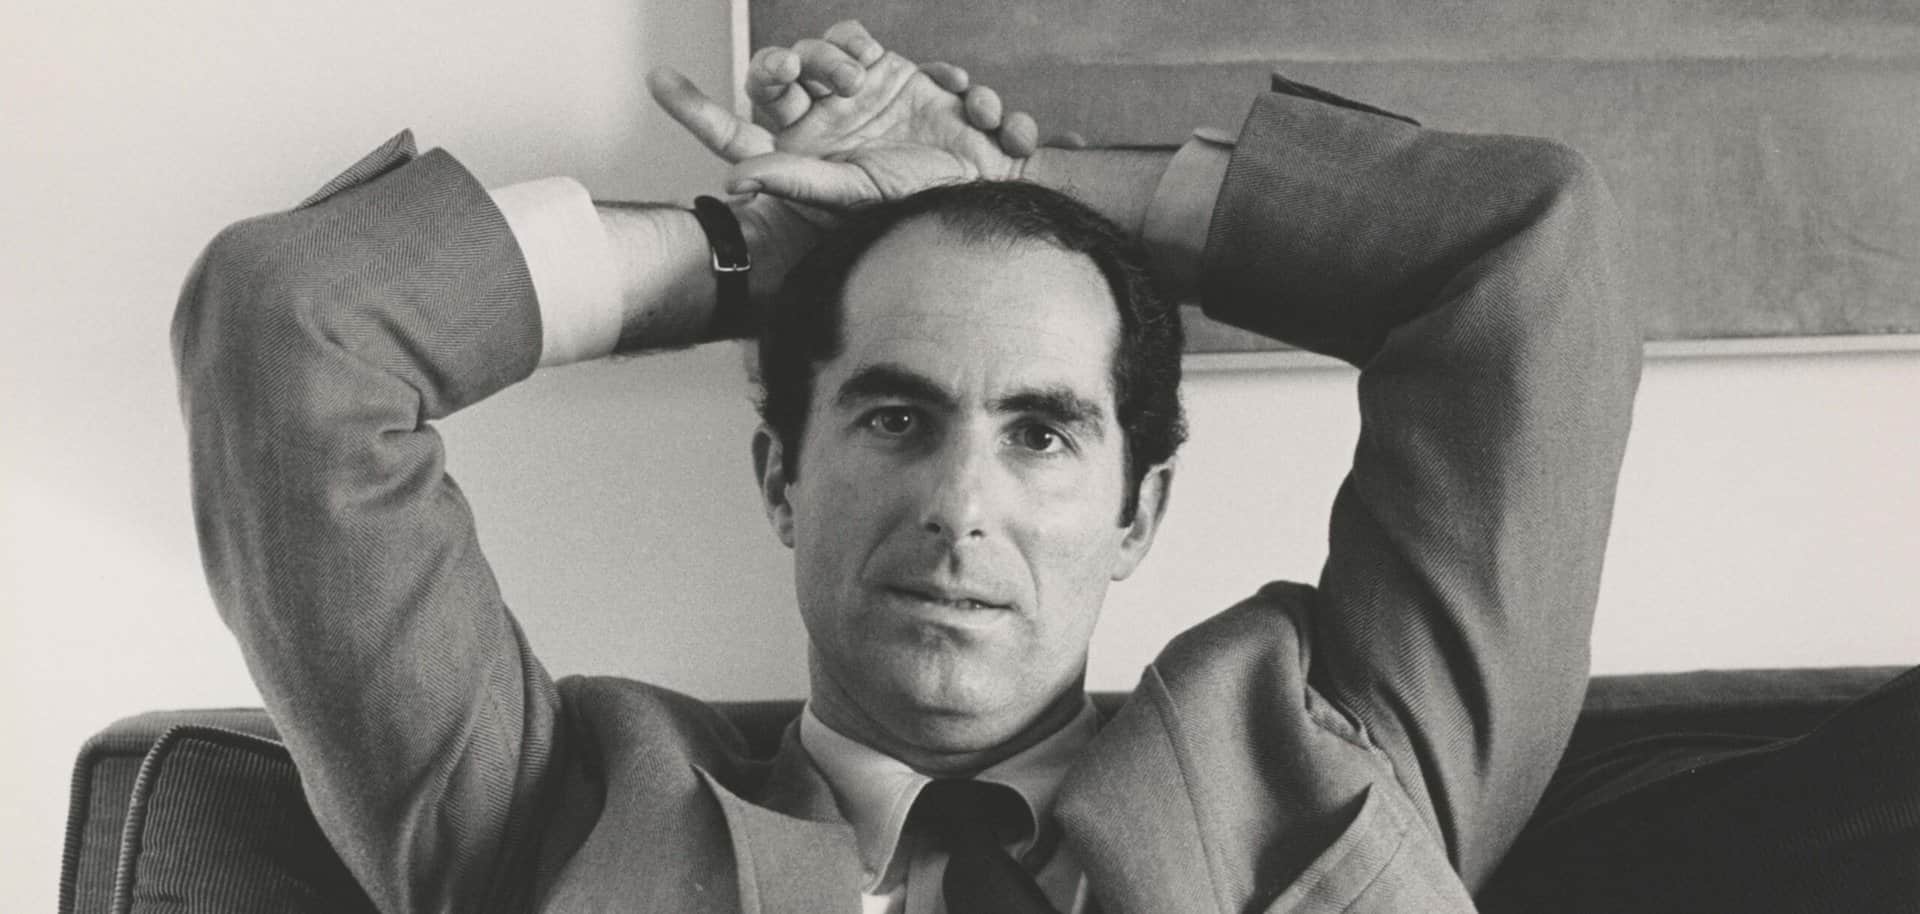 A greyscale close-up photo of Philip Roth staring at the camera, wearing a suit.